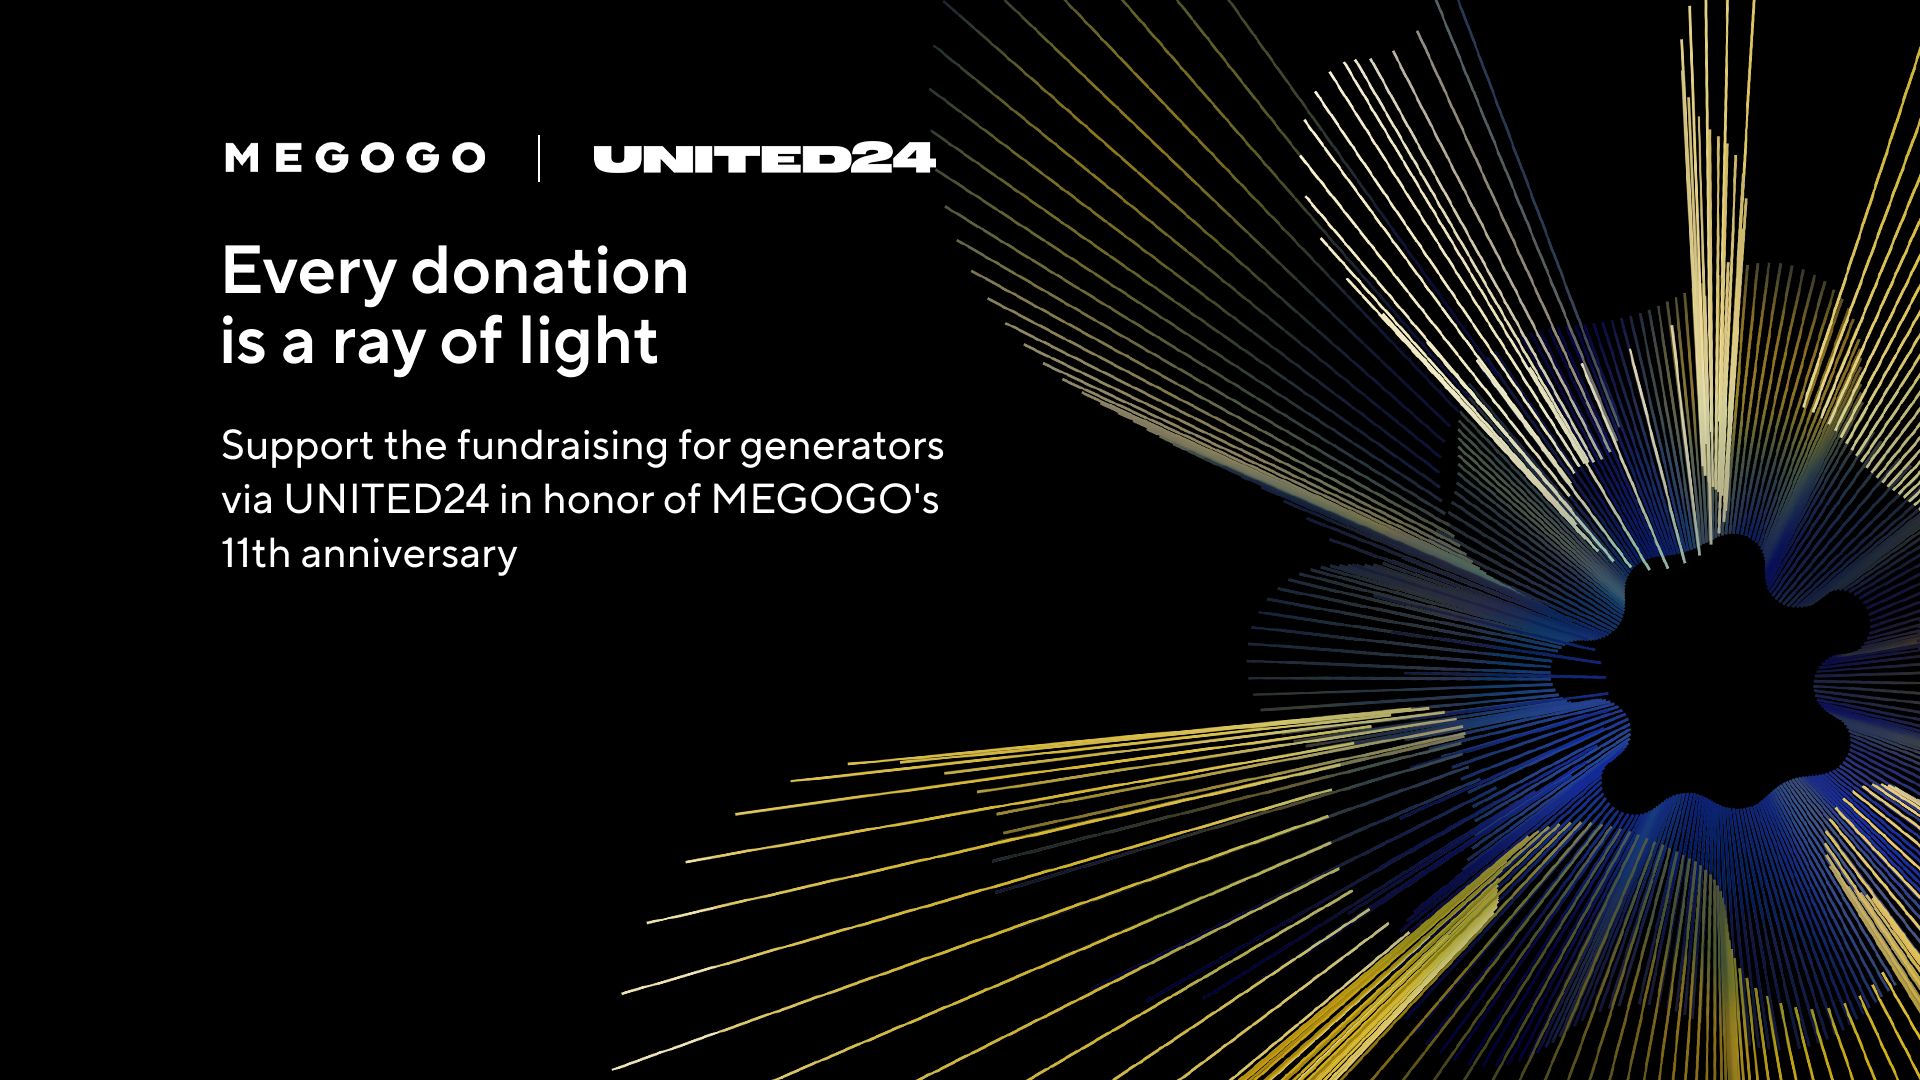 MEGOGO Partners with UNITED24, Launching a Fundraiser for Generators